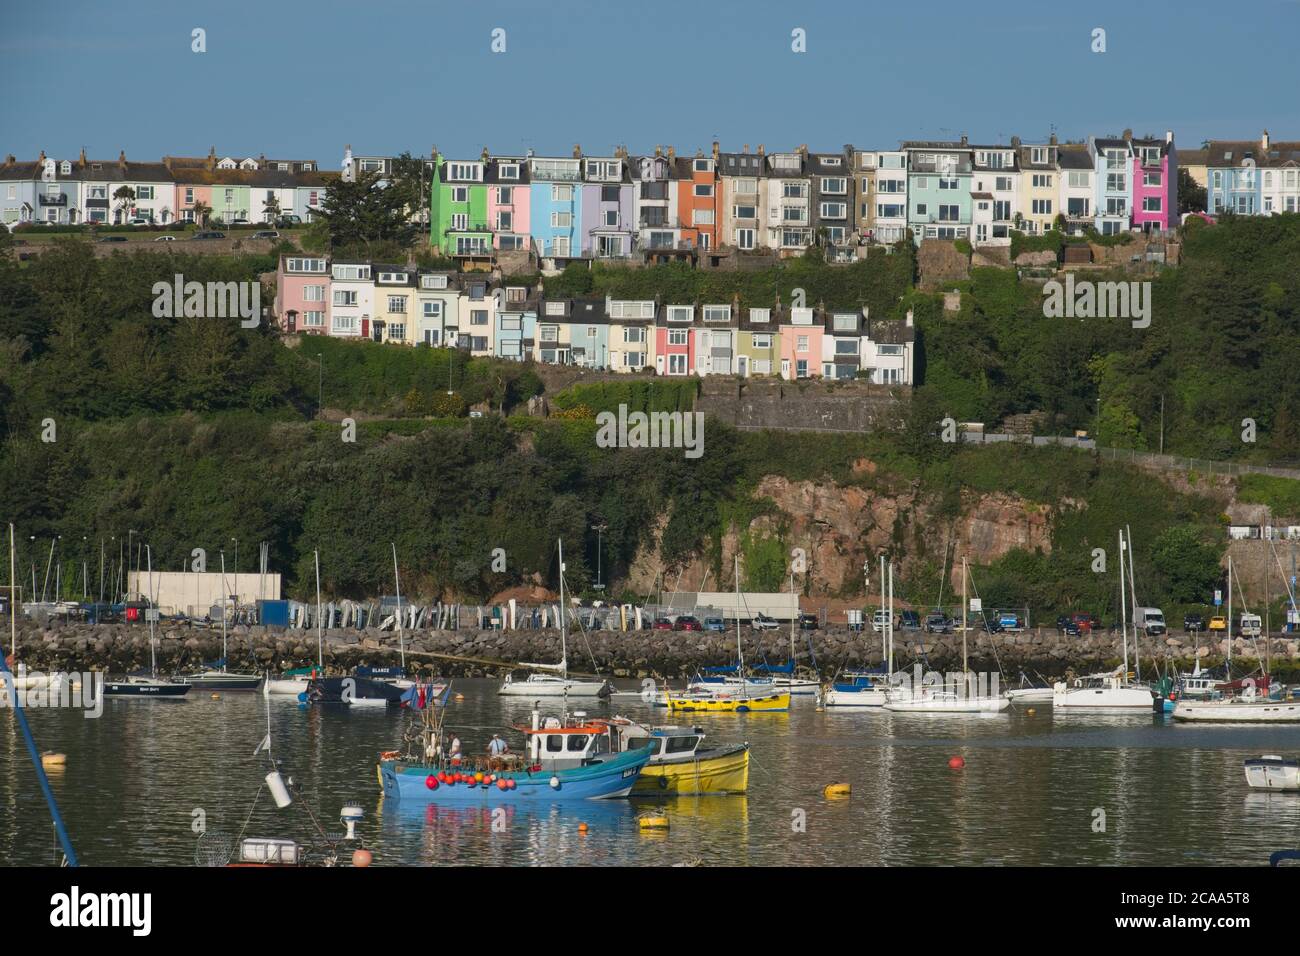 Early AM Brixham harbour views. Row of colourful houses in two rows above harbour on skyline.  Boats on moorings below Blue sky Landscape format. Stock Photo